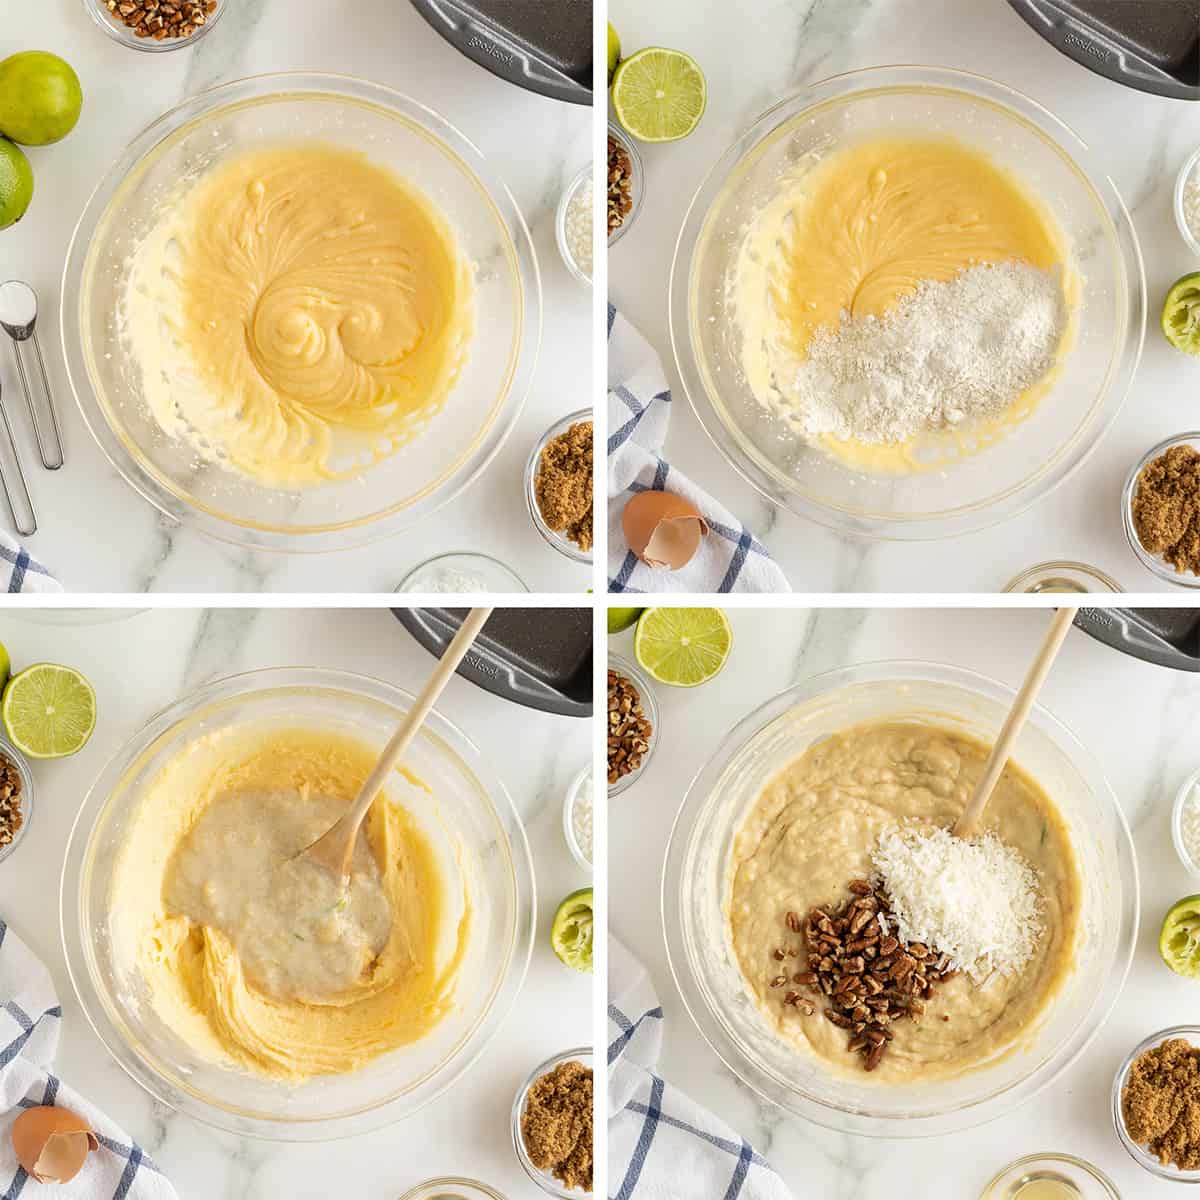 Four images of banana bread batter ingredients combined in a glass mixing bowl.